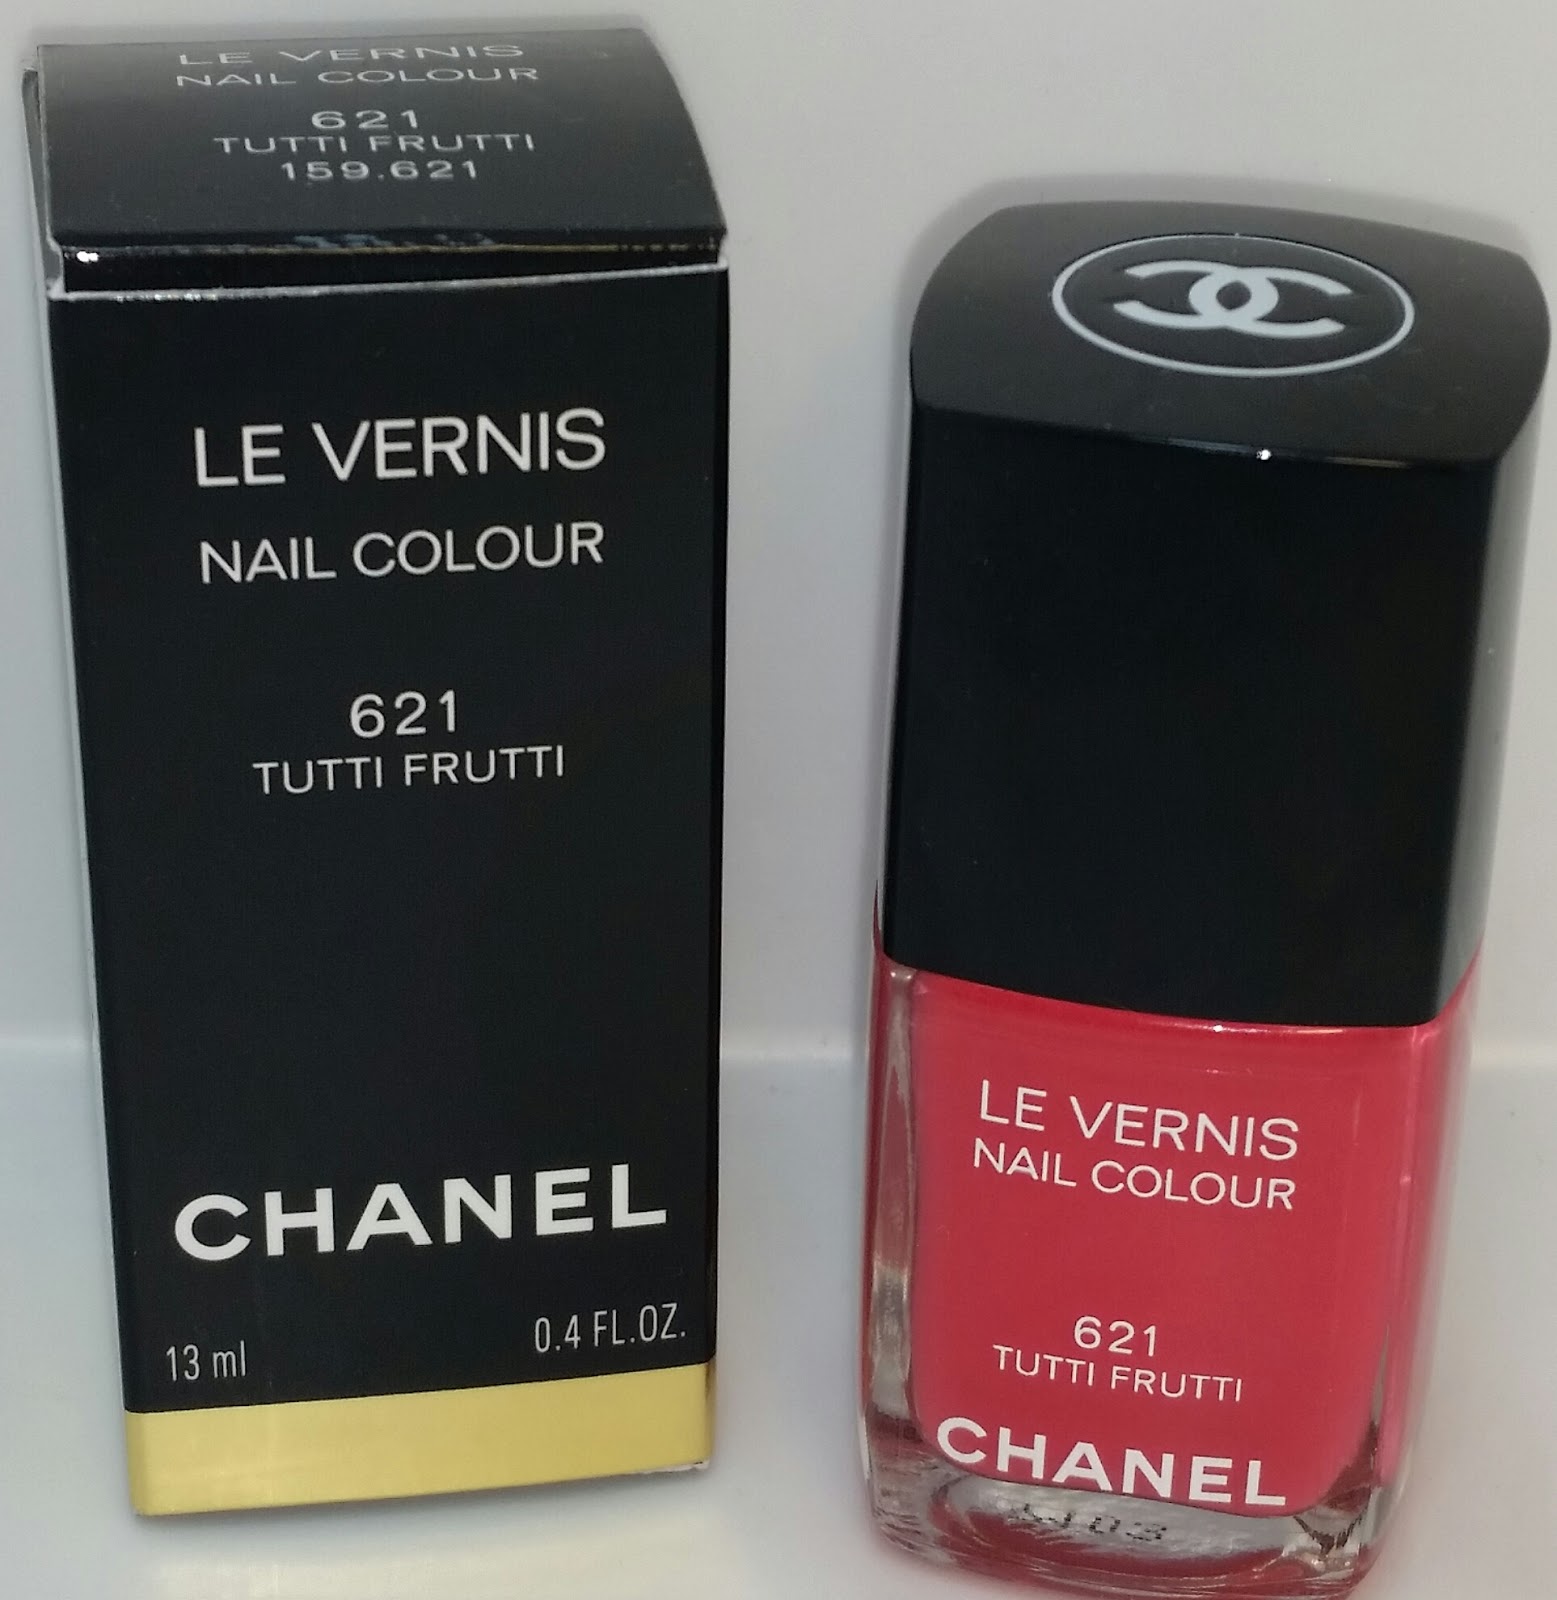 Jayded Dreaming Beauty Blog : 621 TUTTI FRUTTI CHANEL LE VERNIS NAIL COLOUR  - SWATCHES AND REVIEW